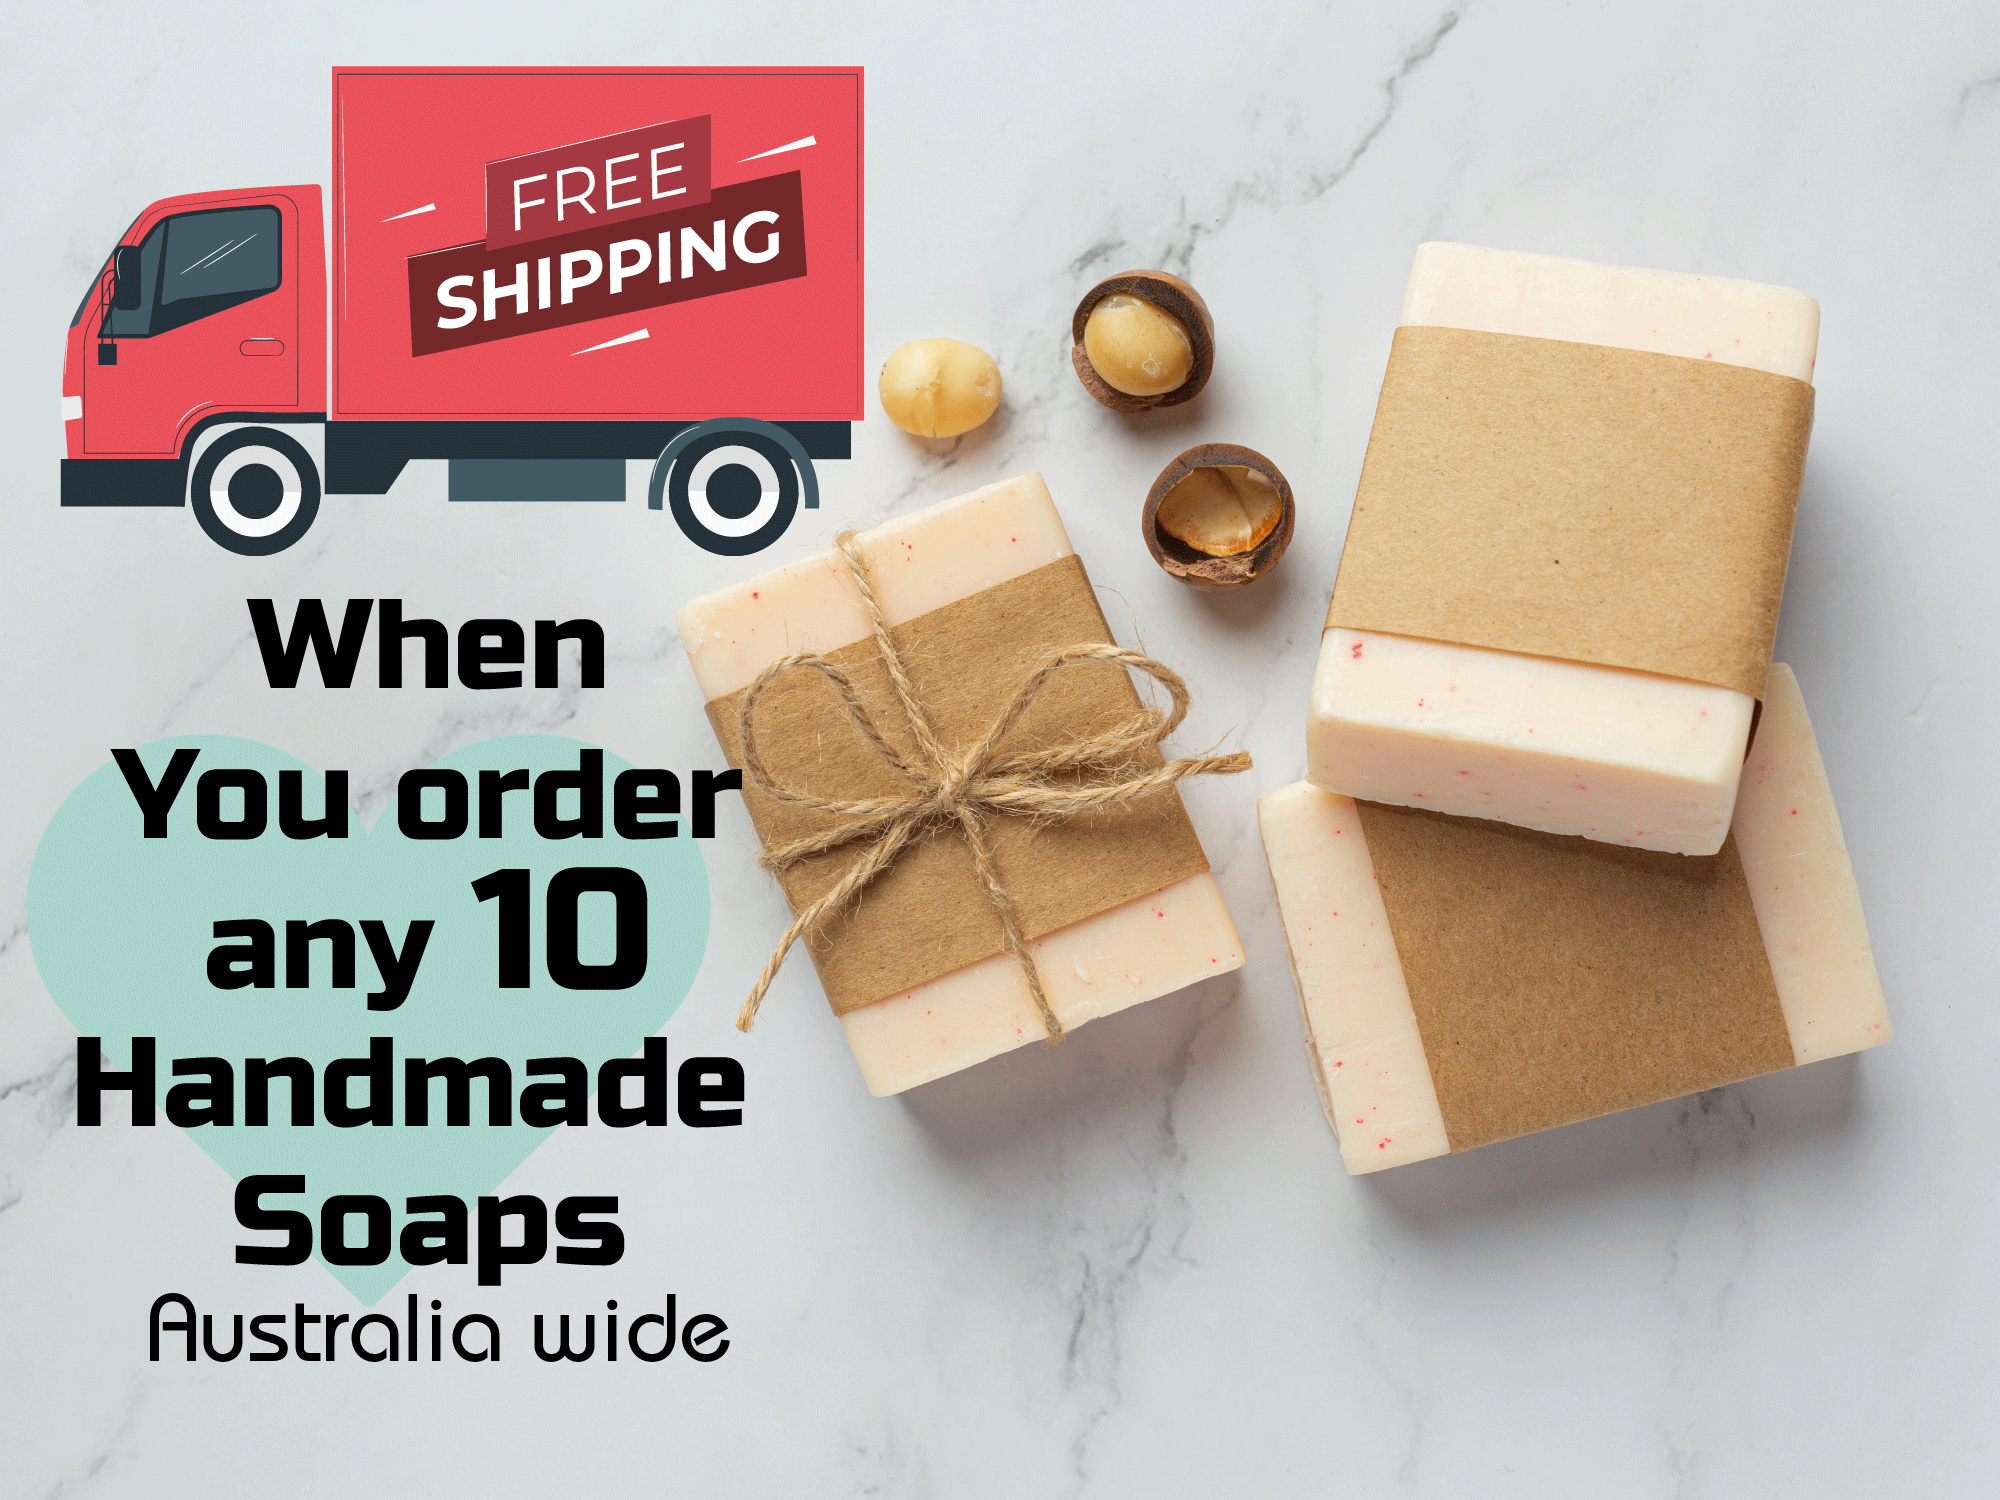 Free-Shipping=on=10=soaps